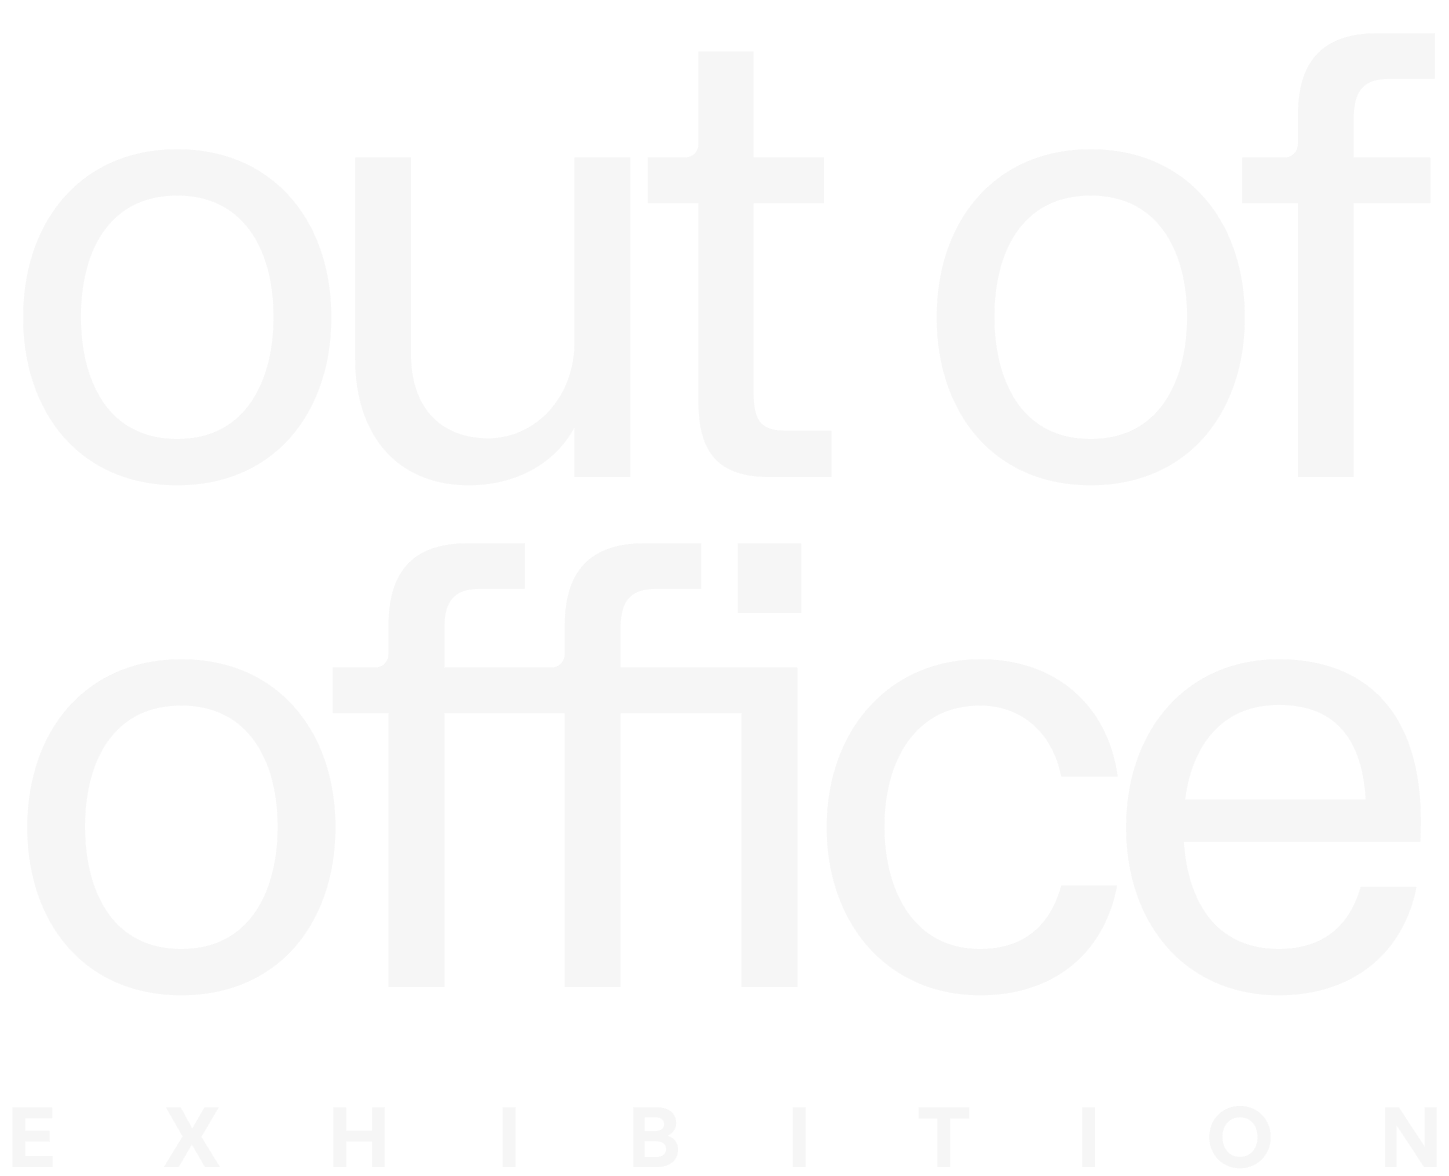 Out of Office 